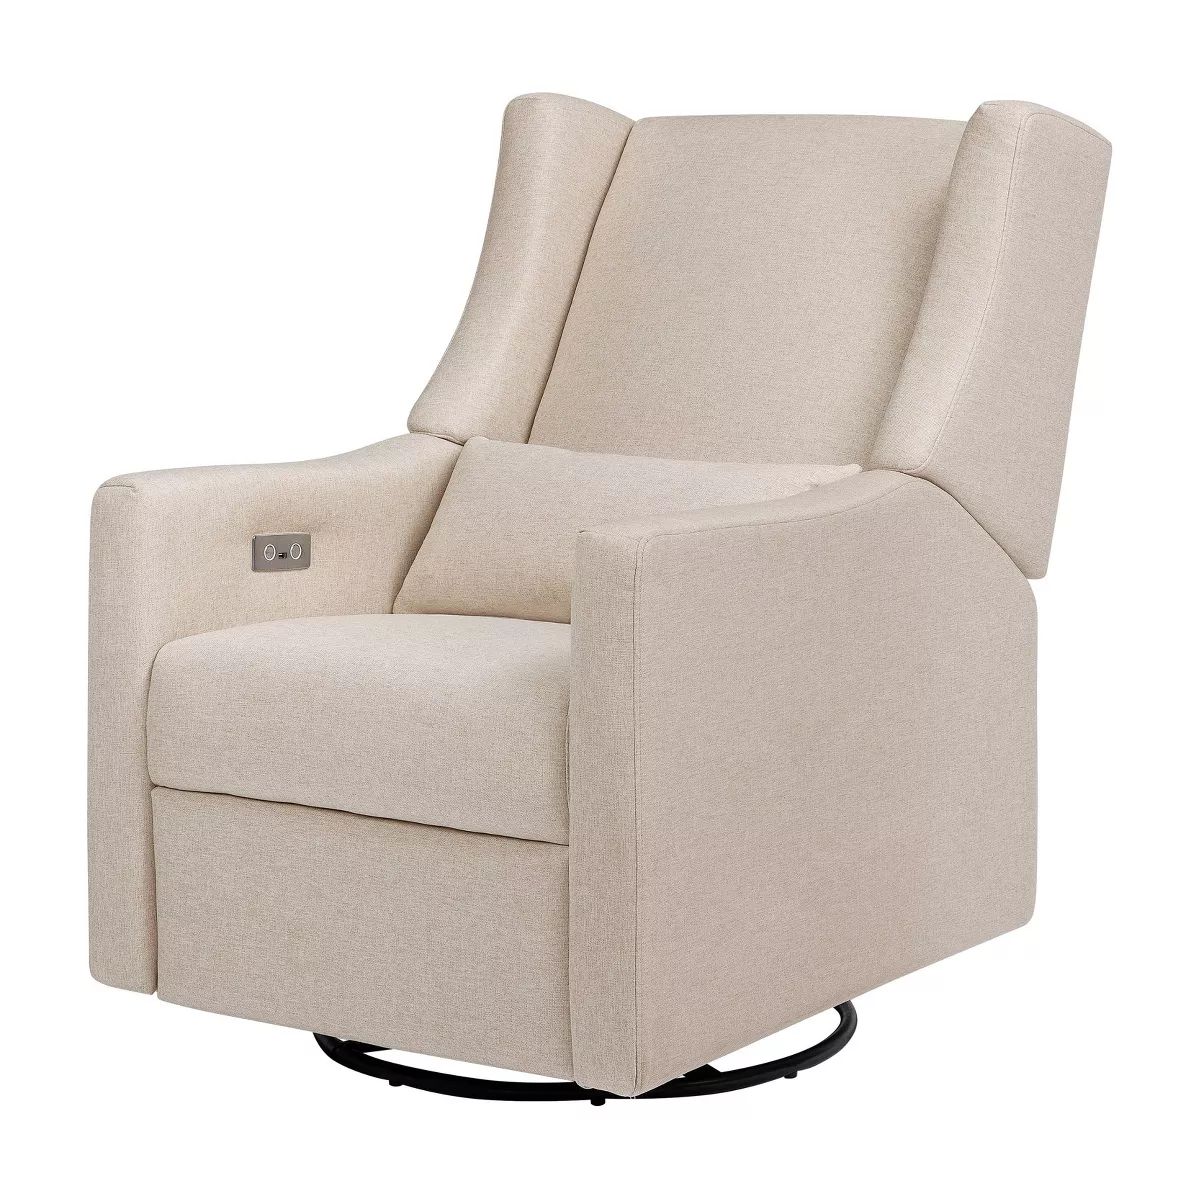 Babyletto Kiwi Glider Power Recliner with Electronic Control and USB - Performance Beach | Target